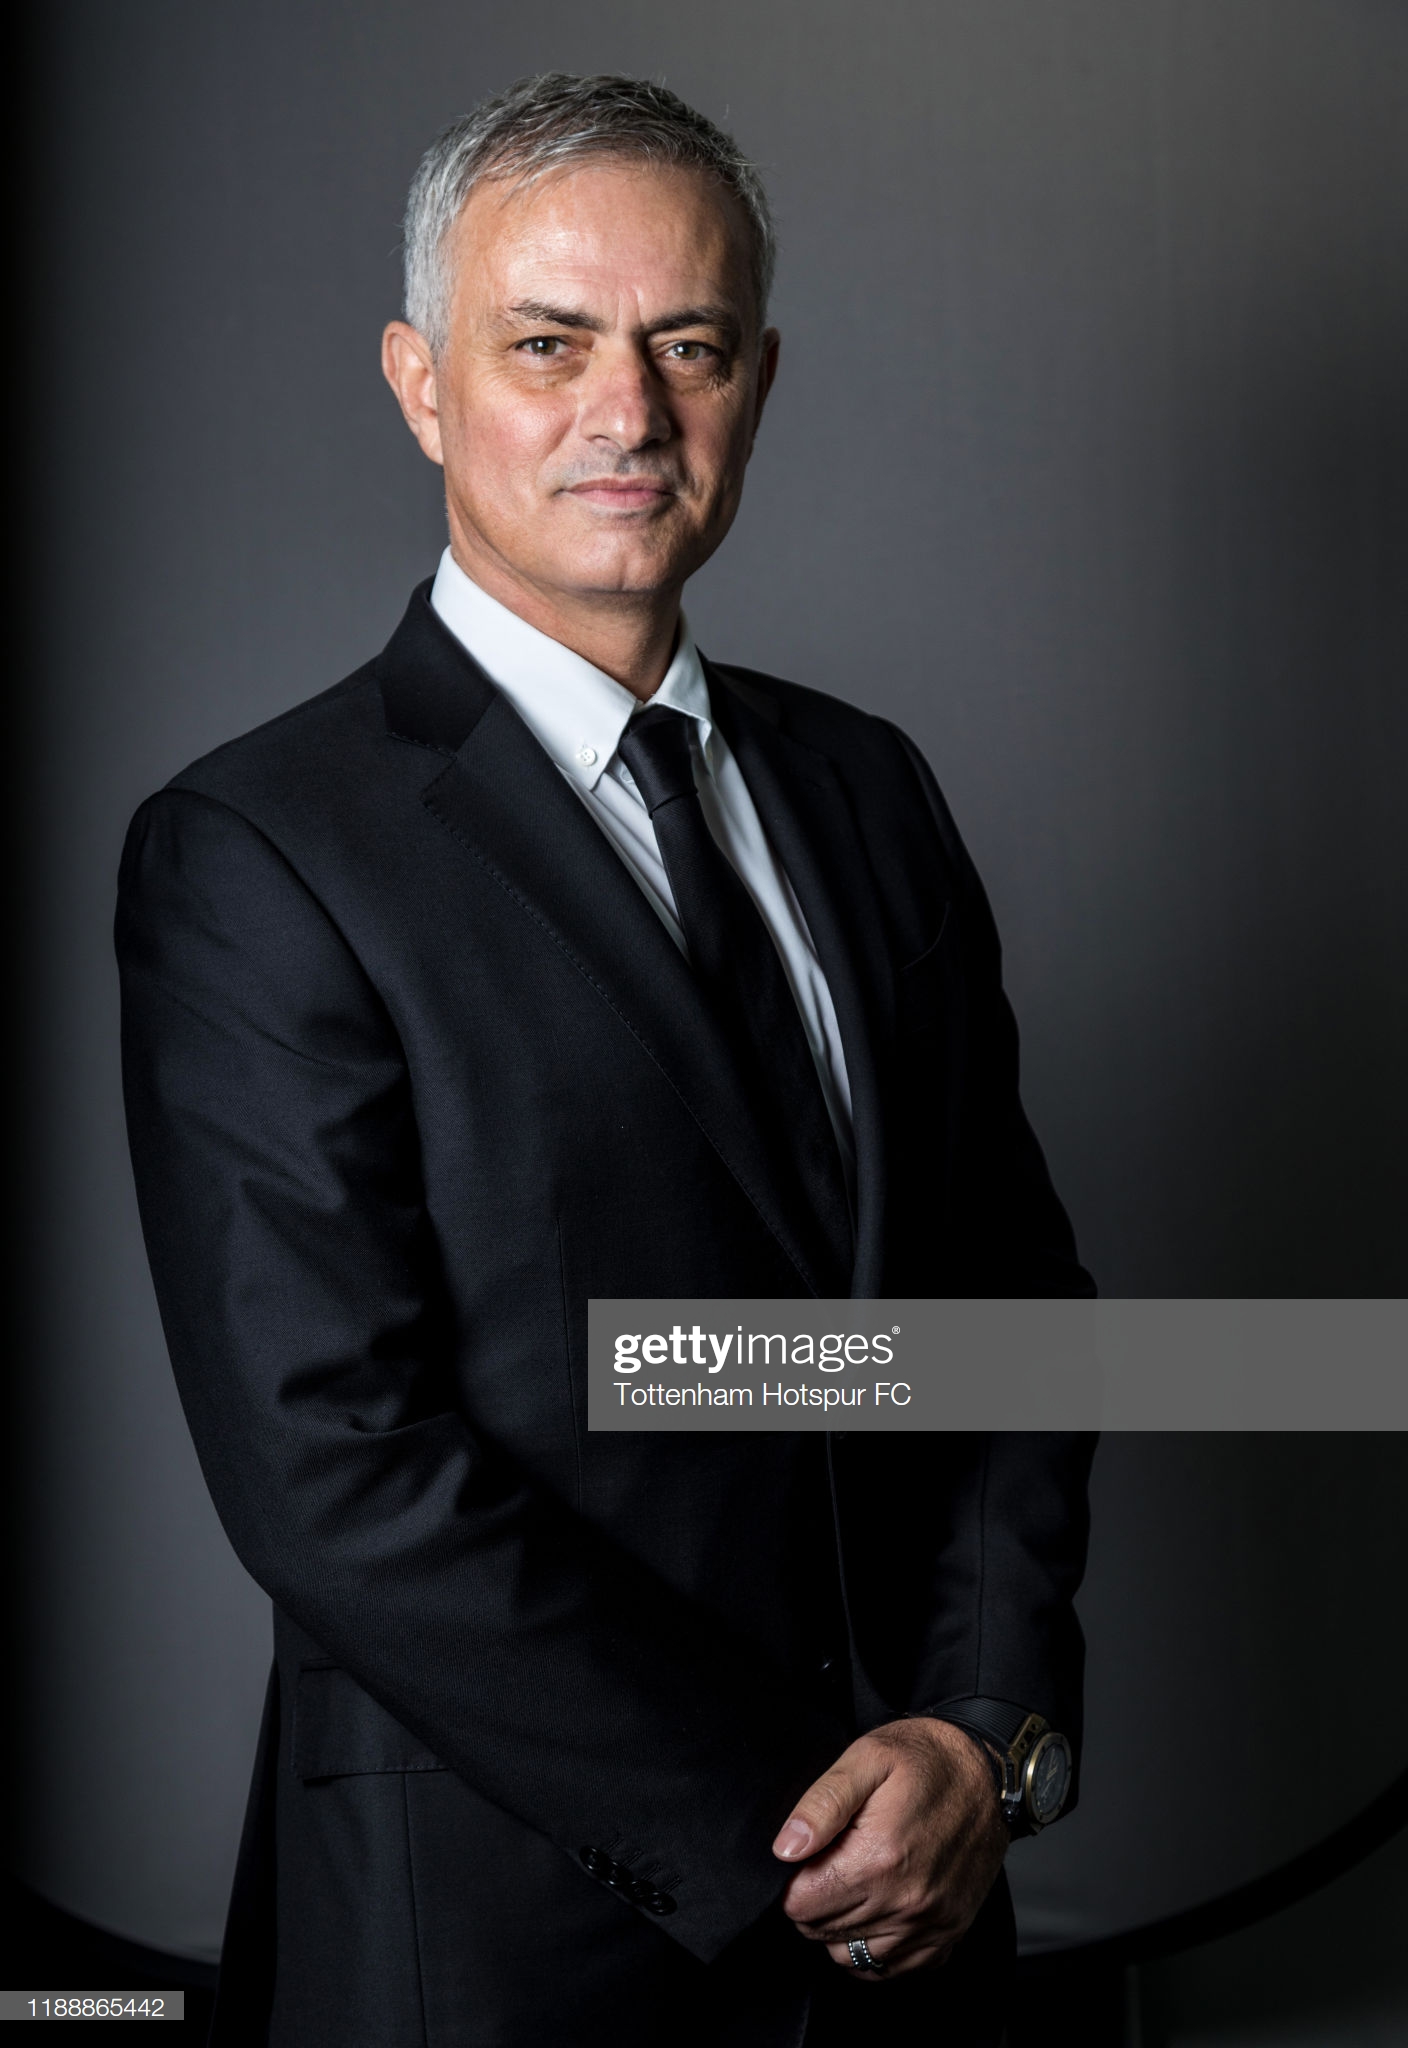 gettyimages-1188865442-2048x2048.jpg